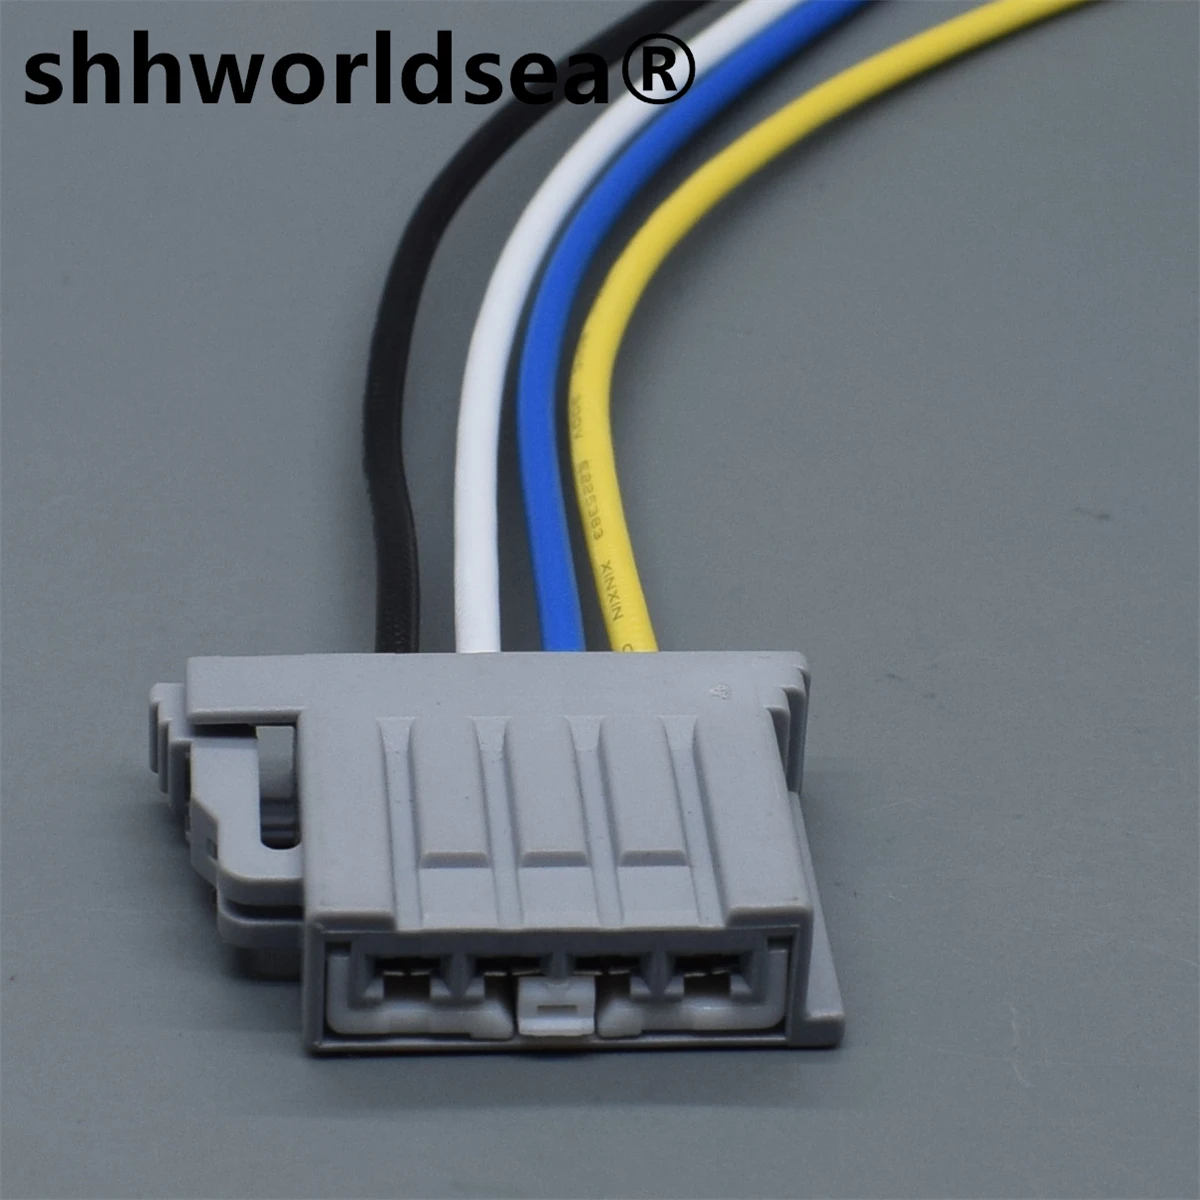 

shhworldsea 4 Pin 2.8 Series Grey Electric Cable Harness Unsealed Socket With Terminal For Automobile 7283-2105-40